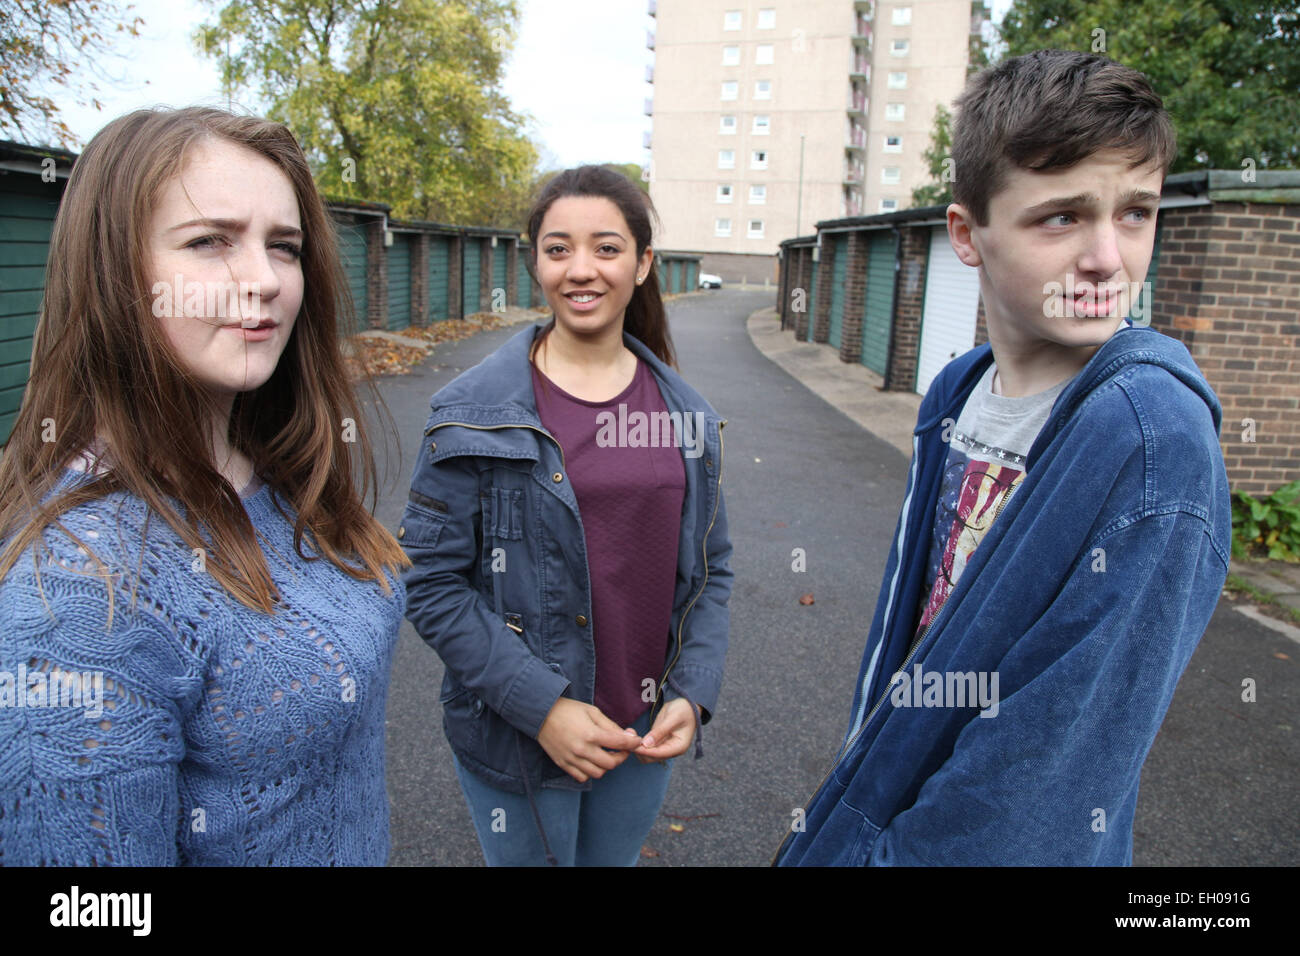 Teenager group near flats - model released Stock Photo